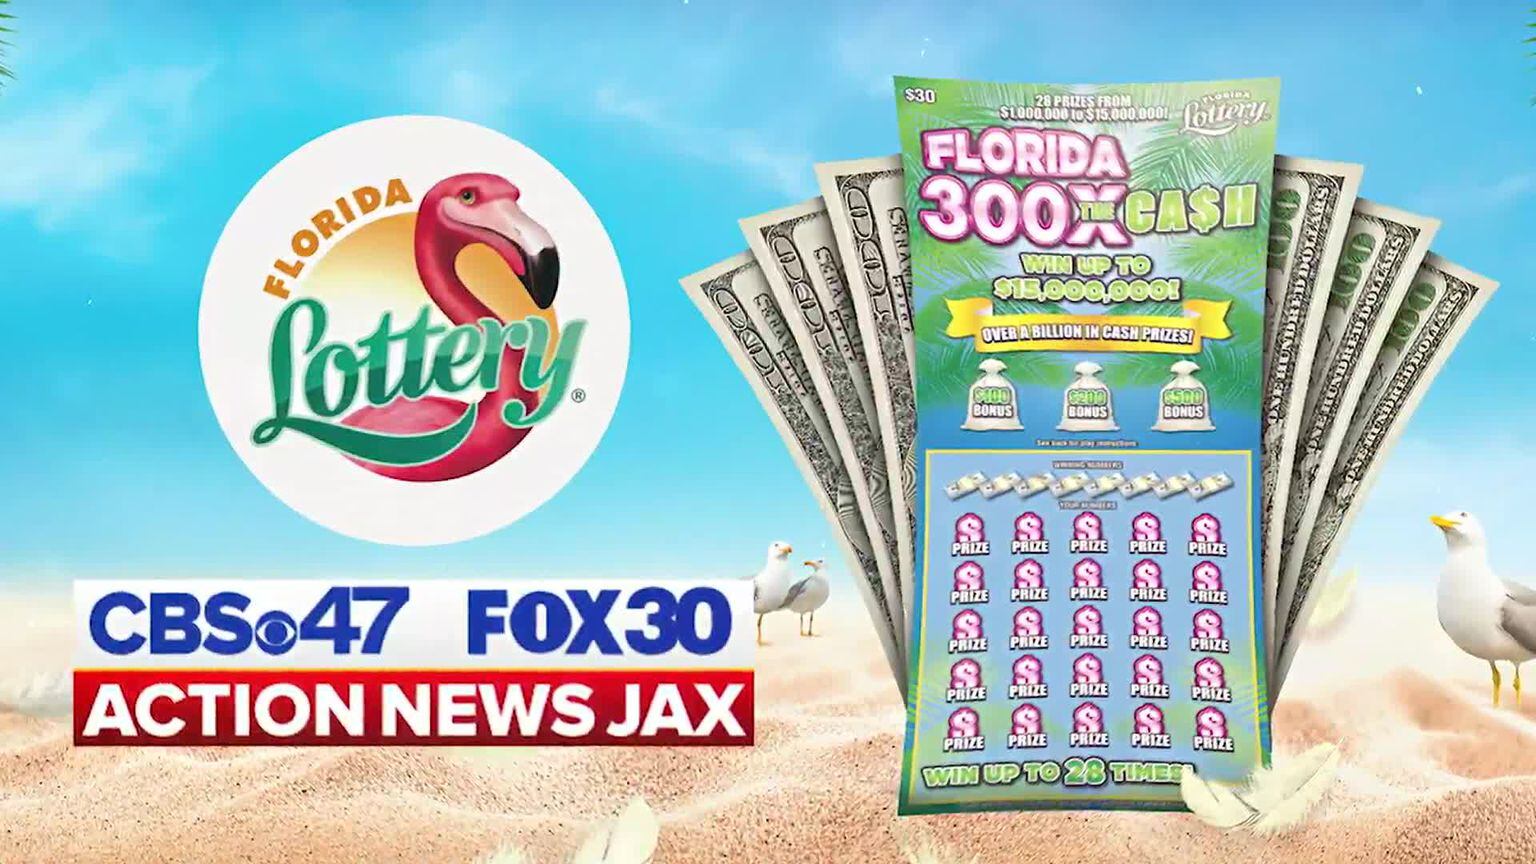 On the 5th of December, the Florida Lottery sent to me; 4 new scratch-off  games – Action News Jax